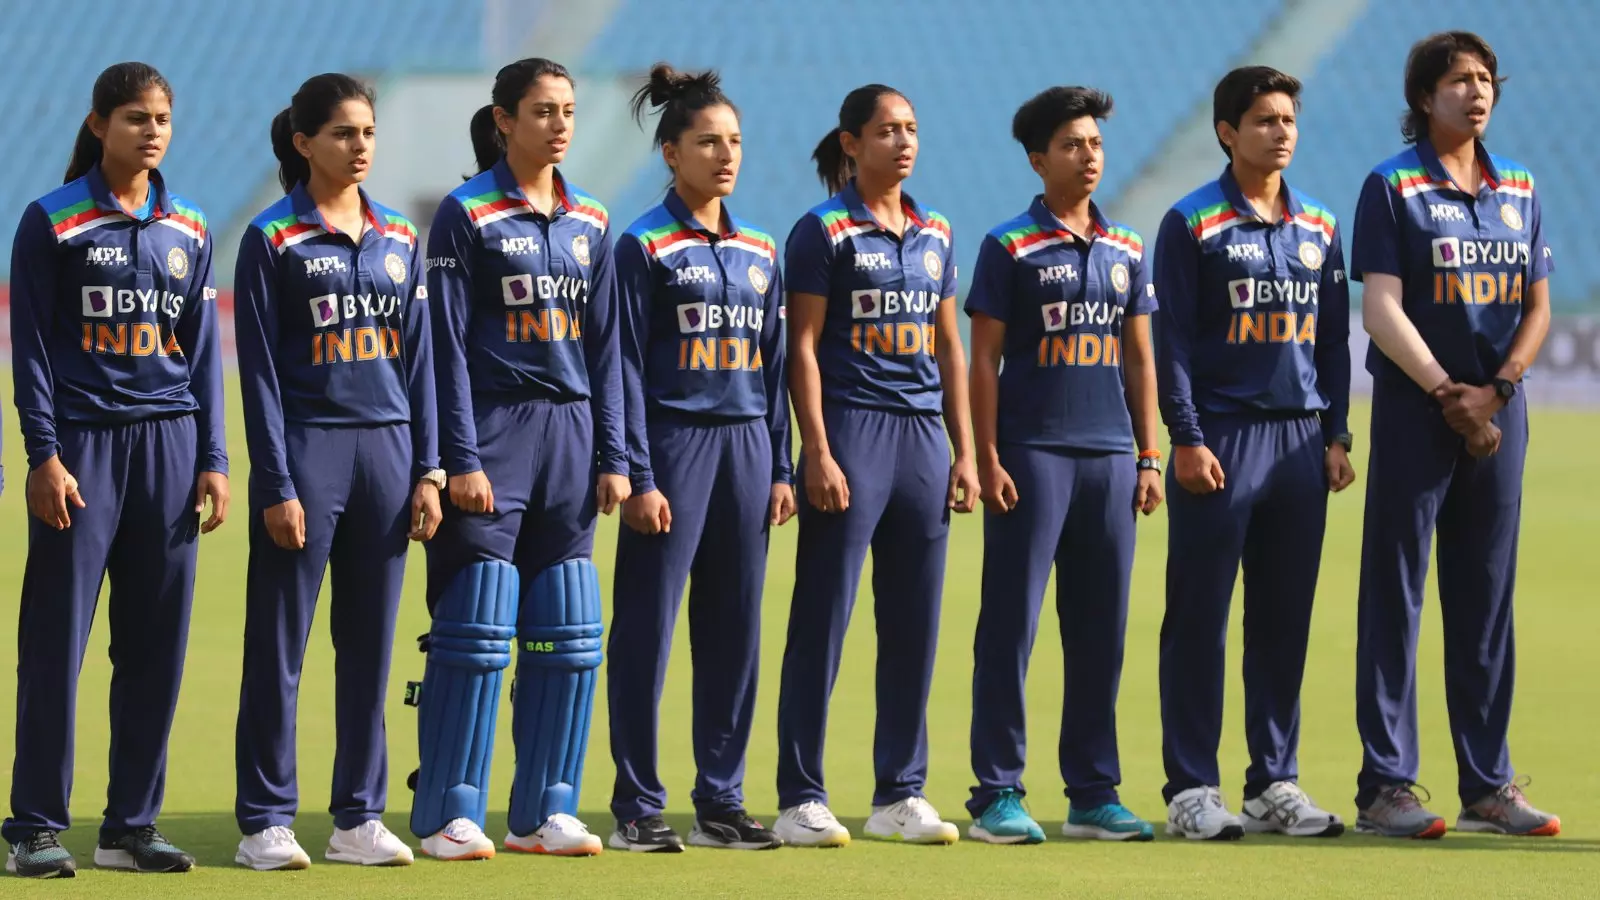 Men: Rs 7 crore, Women: Rs 50 lakh — A look into pay gap between Indian  cricketers